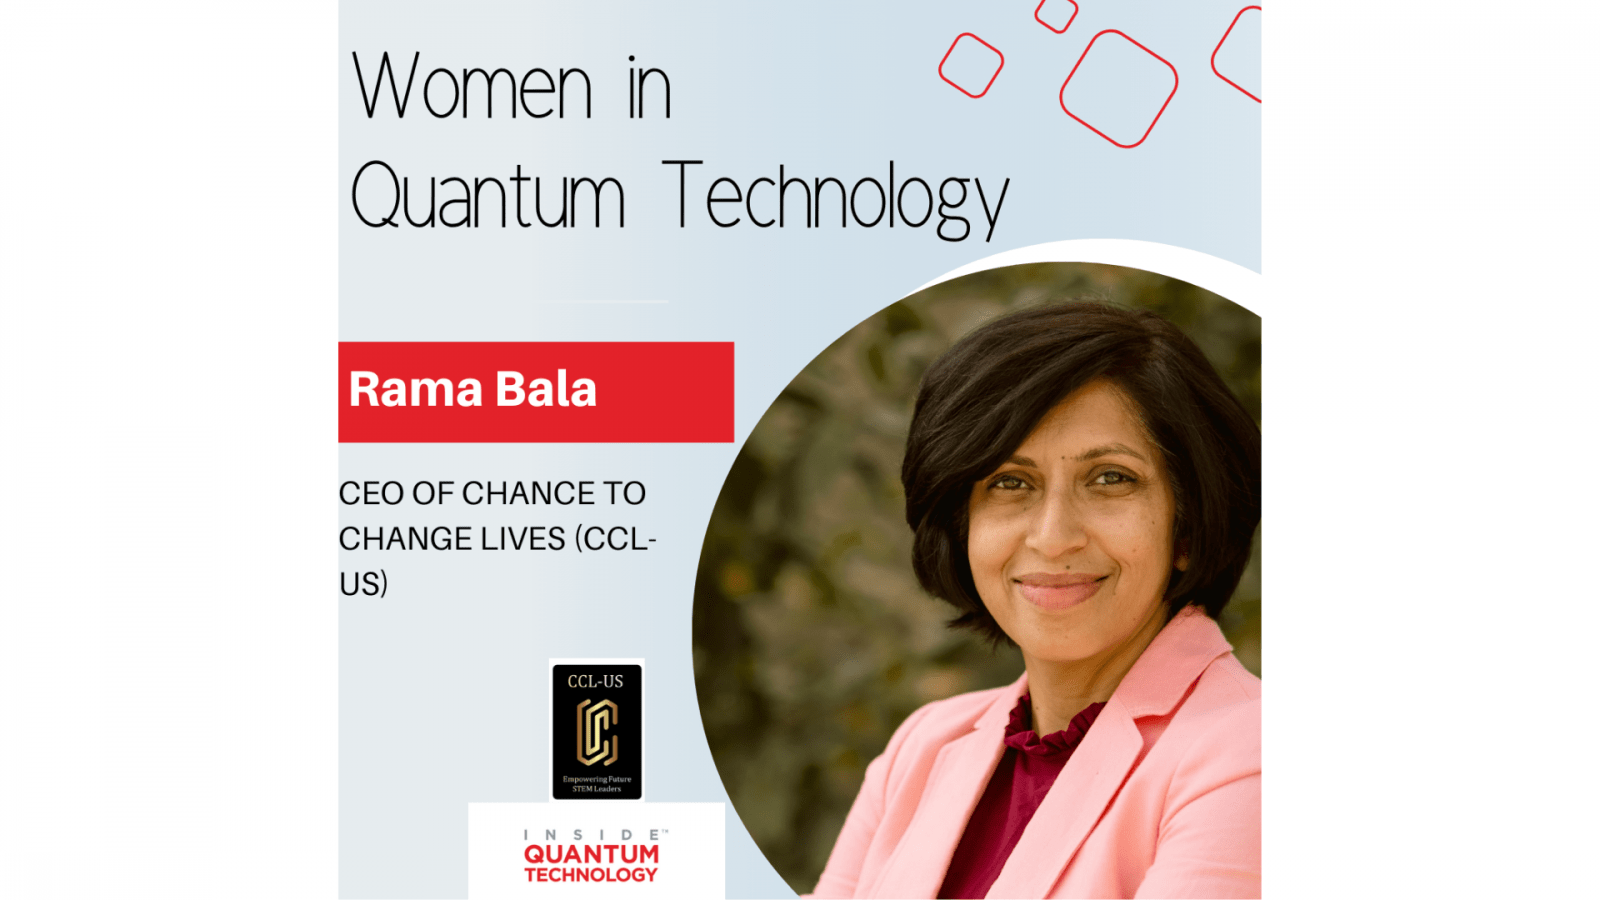 Dr. Rama ‘Bala’ Balasubramanian, CEO and President of Chance to Change Lives (CCL-US) discusses the importance of quantum education